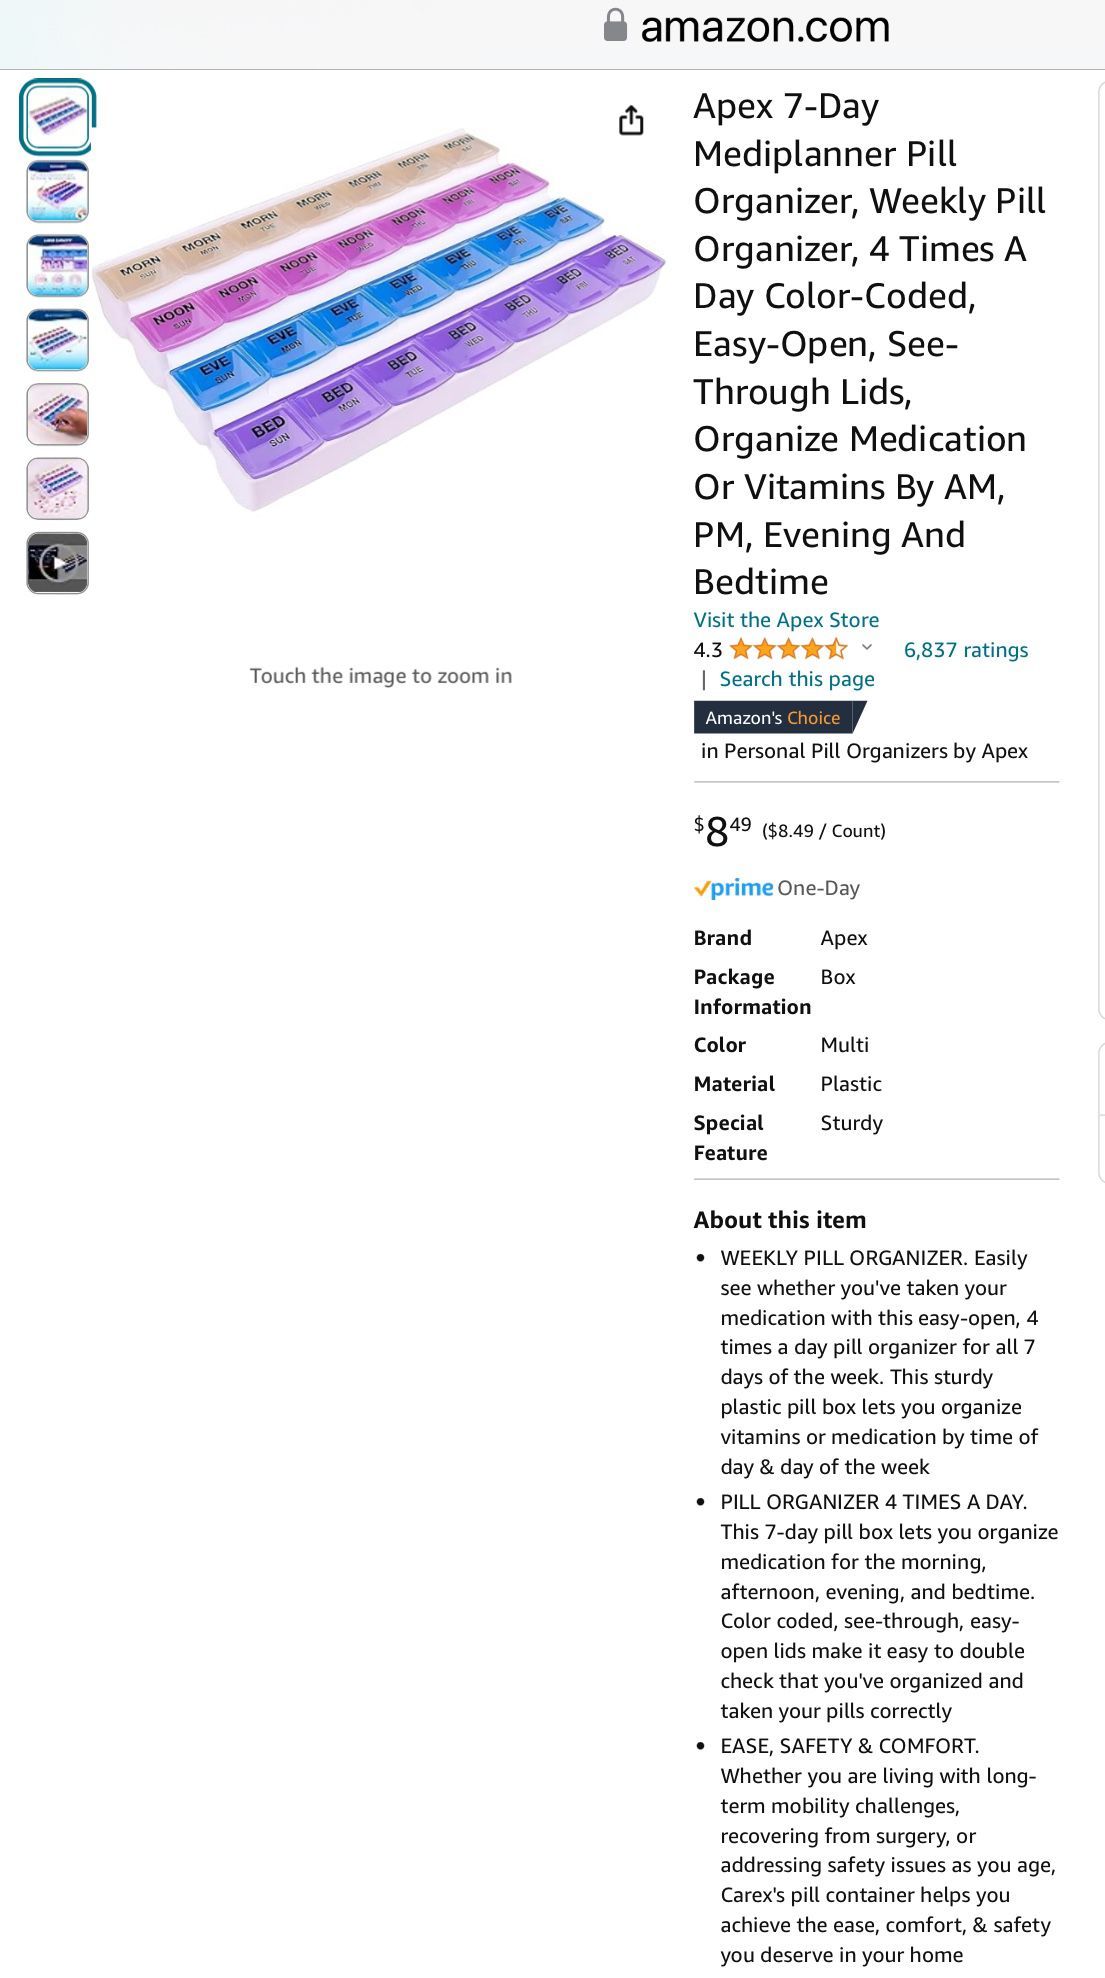 Pill Or Vitamin organizer Apex 7 Day Weekly 4 Times A Day $8